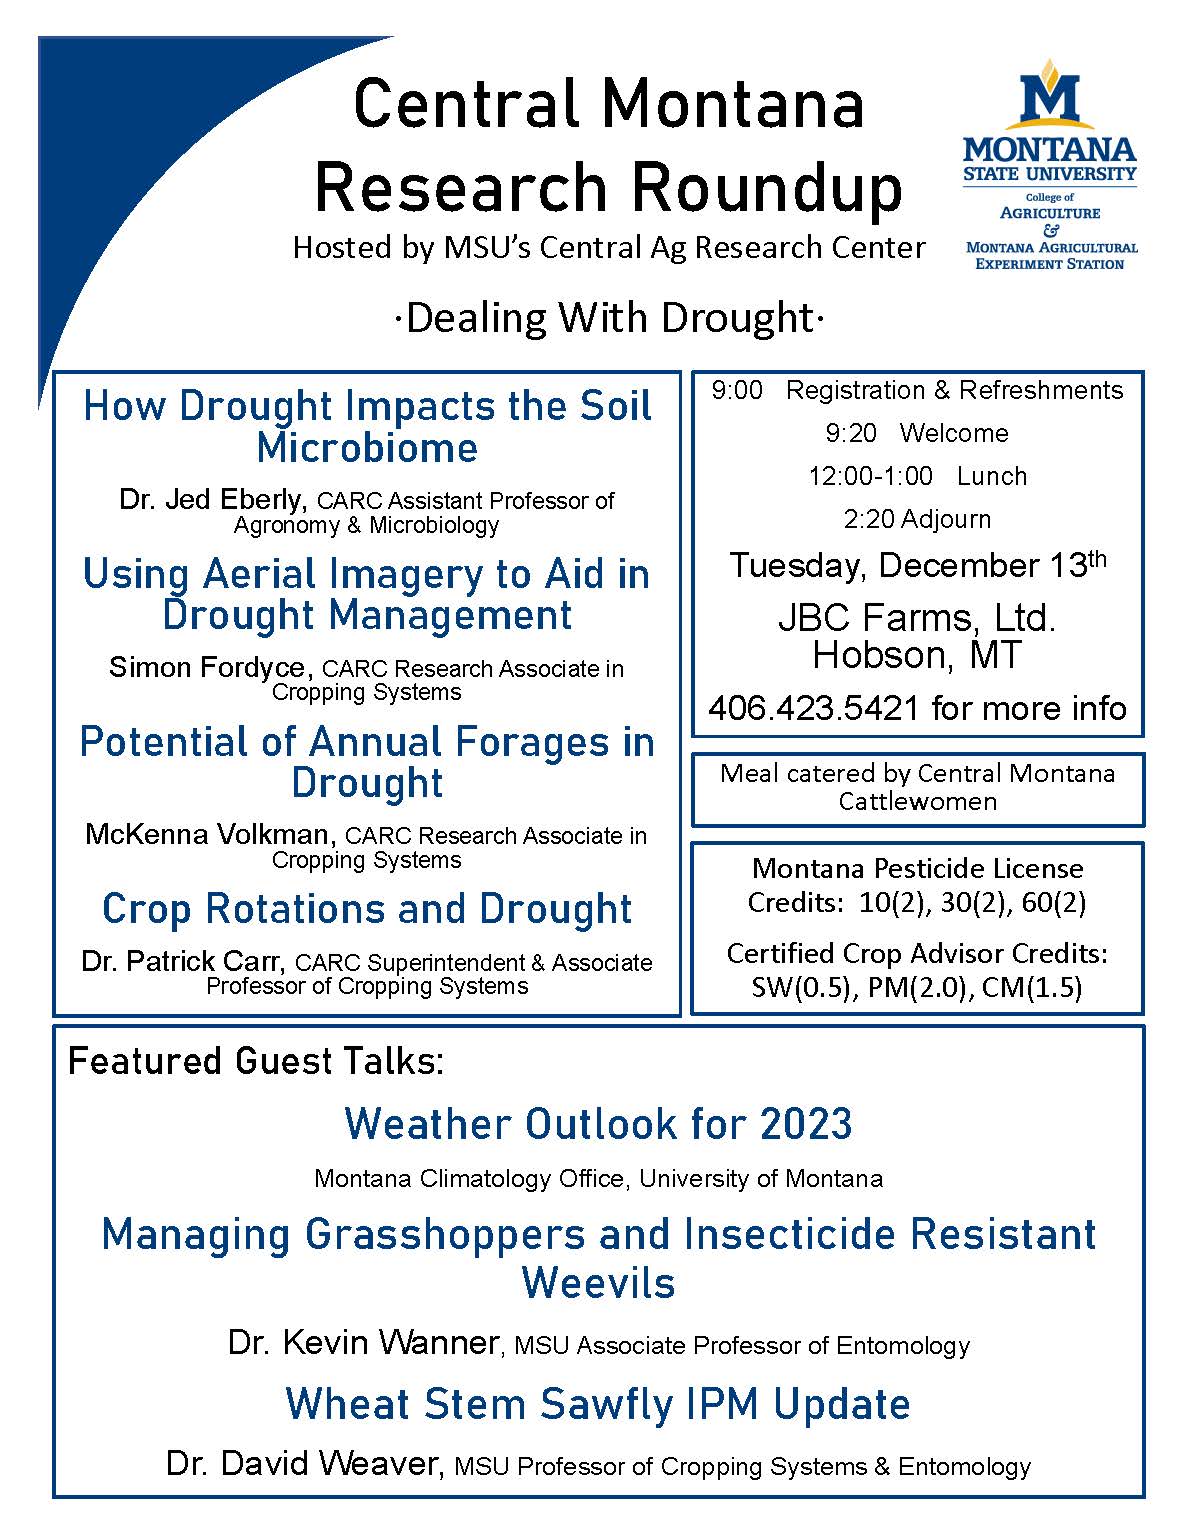 Research roundup 2022 poster